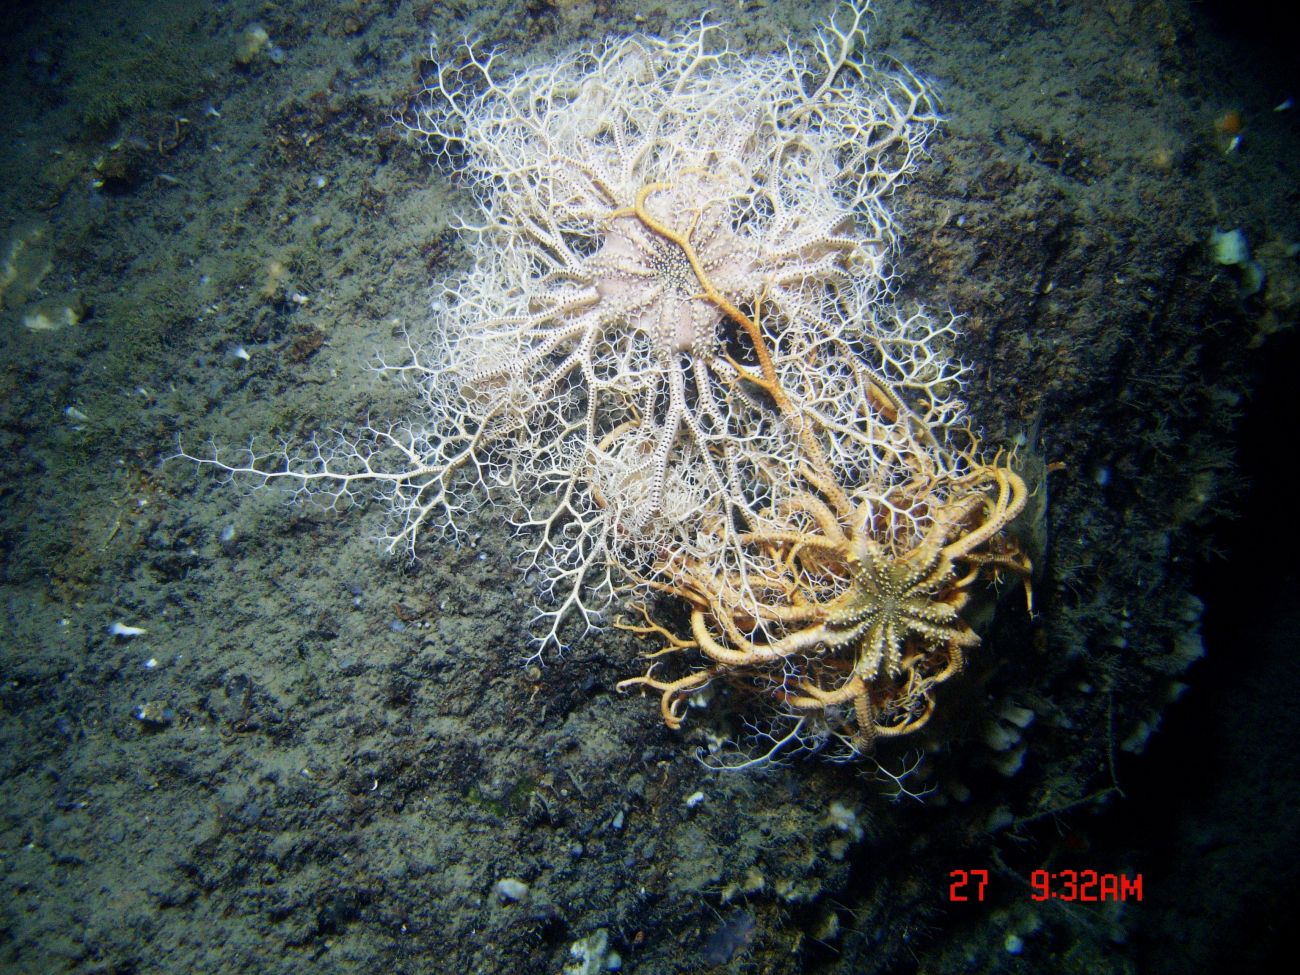 Two intertwined basket stars - one white and one yellow